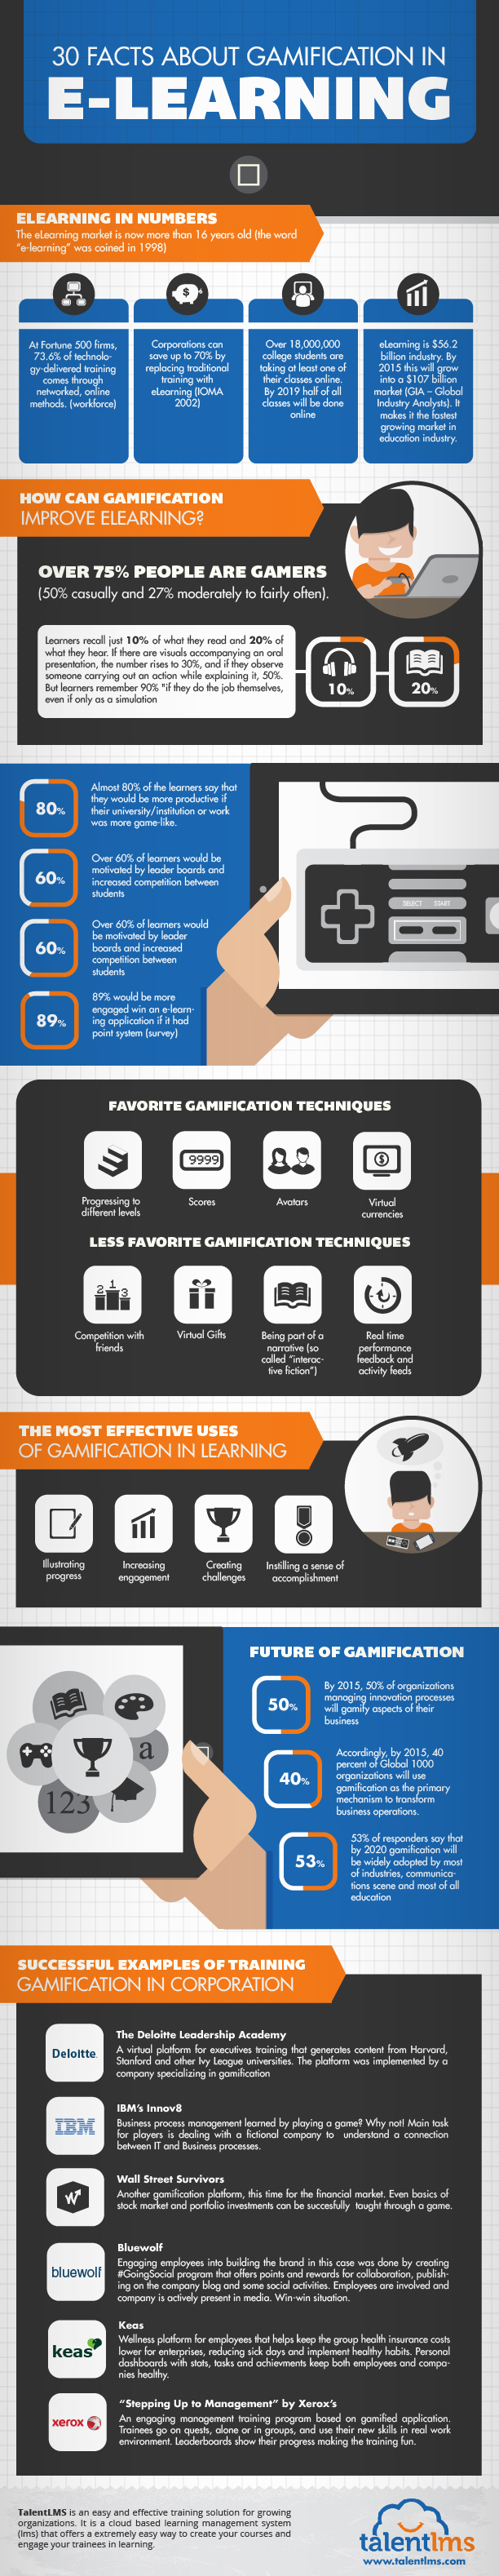 Gamification in e-learning